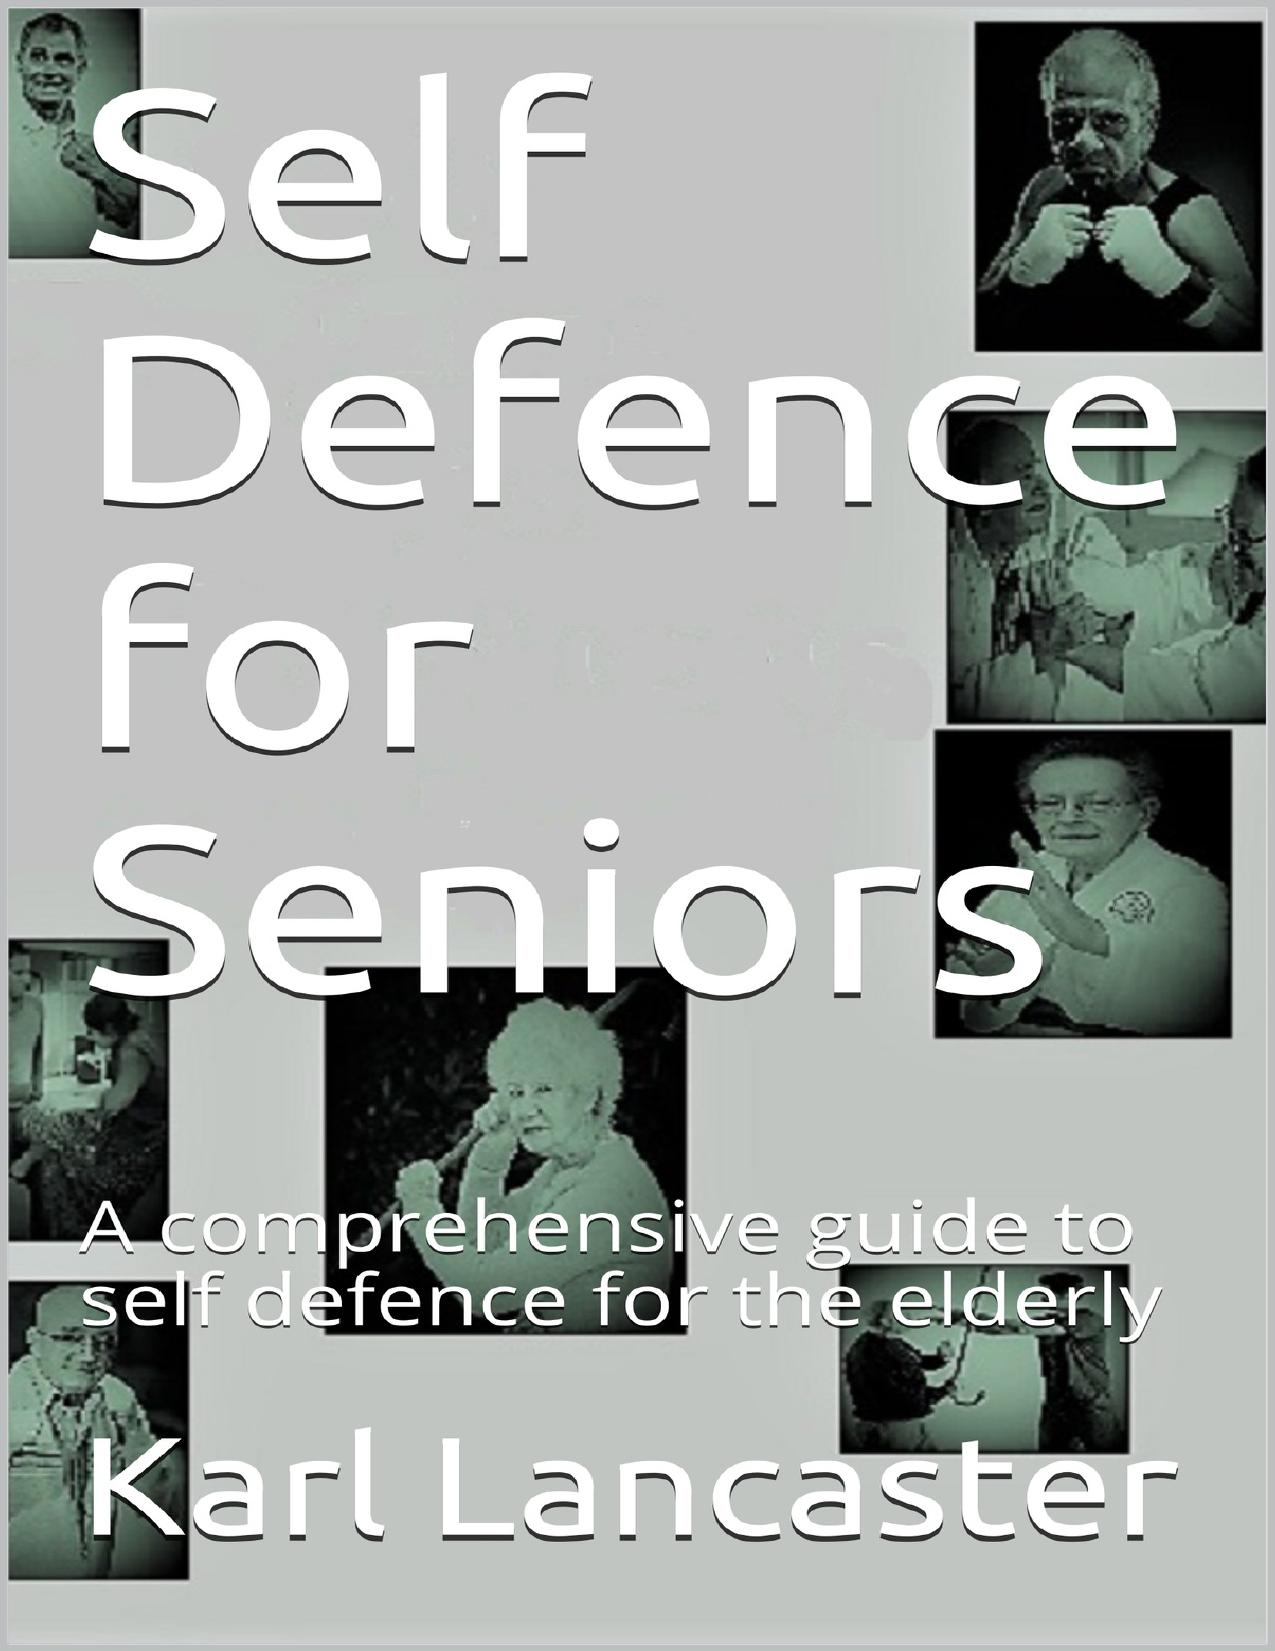 Self Defence for Seniors: A comprehensive guide to self defence for the elderly by Lancaster Karl